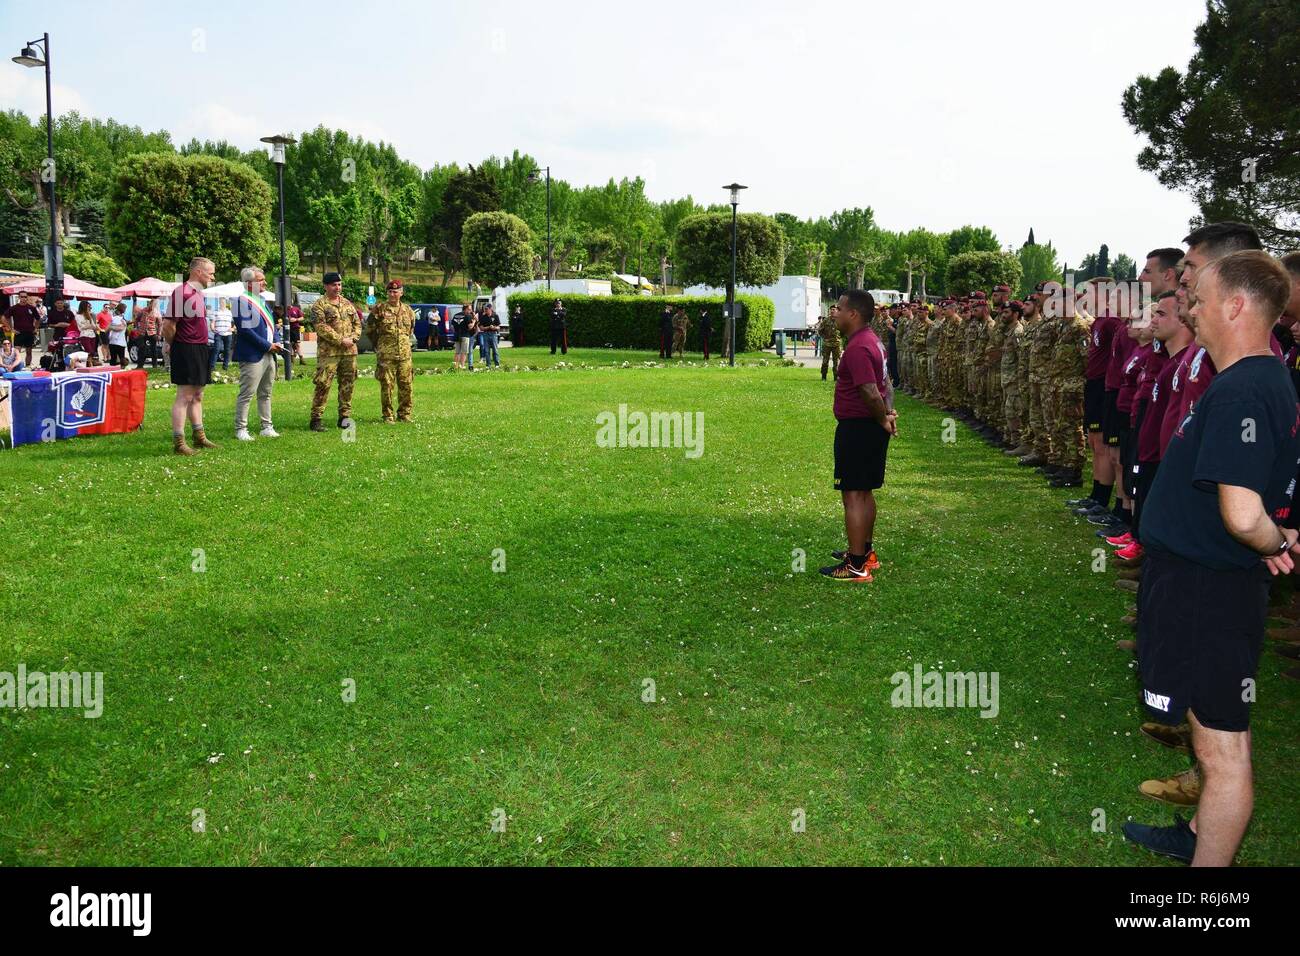 U.S. Army Paratroopers assigned to 1st Battalion, 503rd Infantry Regiment, 173rd Airborne Brigade, Italian Army Paratroopers from the 4th Regimento Paracadutisti Alpini and the Brigata Folgore, and Italian Army Lagunari soldiers during the closing ceremony at lake Garda near Pacengo, Italy, May 18, 2017.. Stock Photo